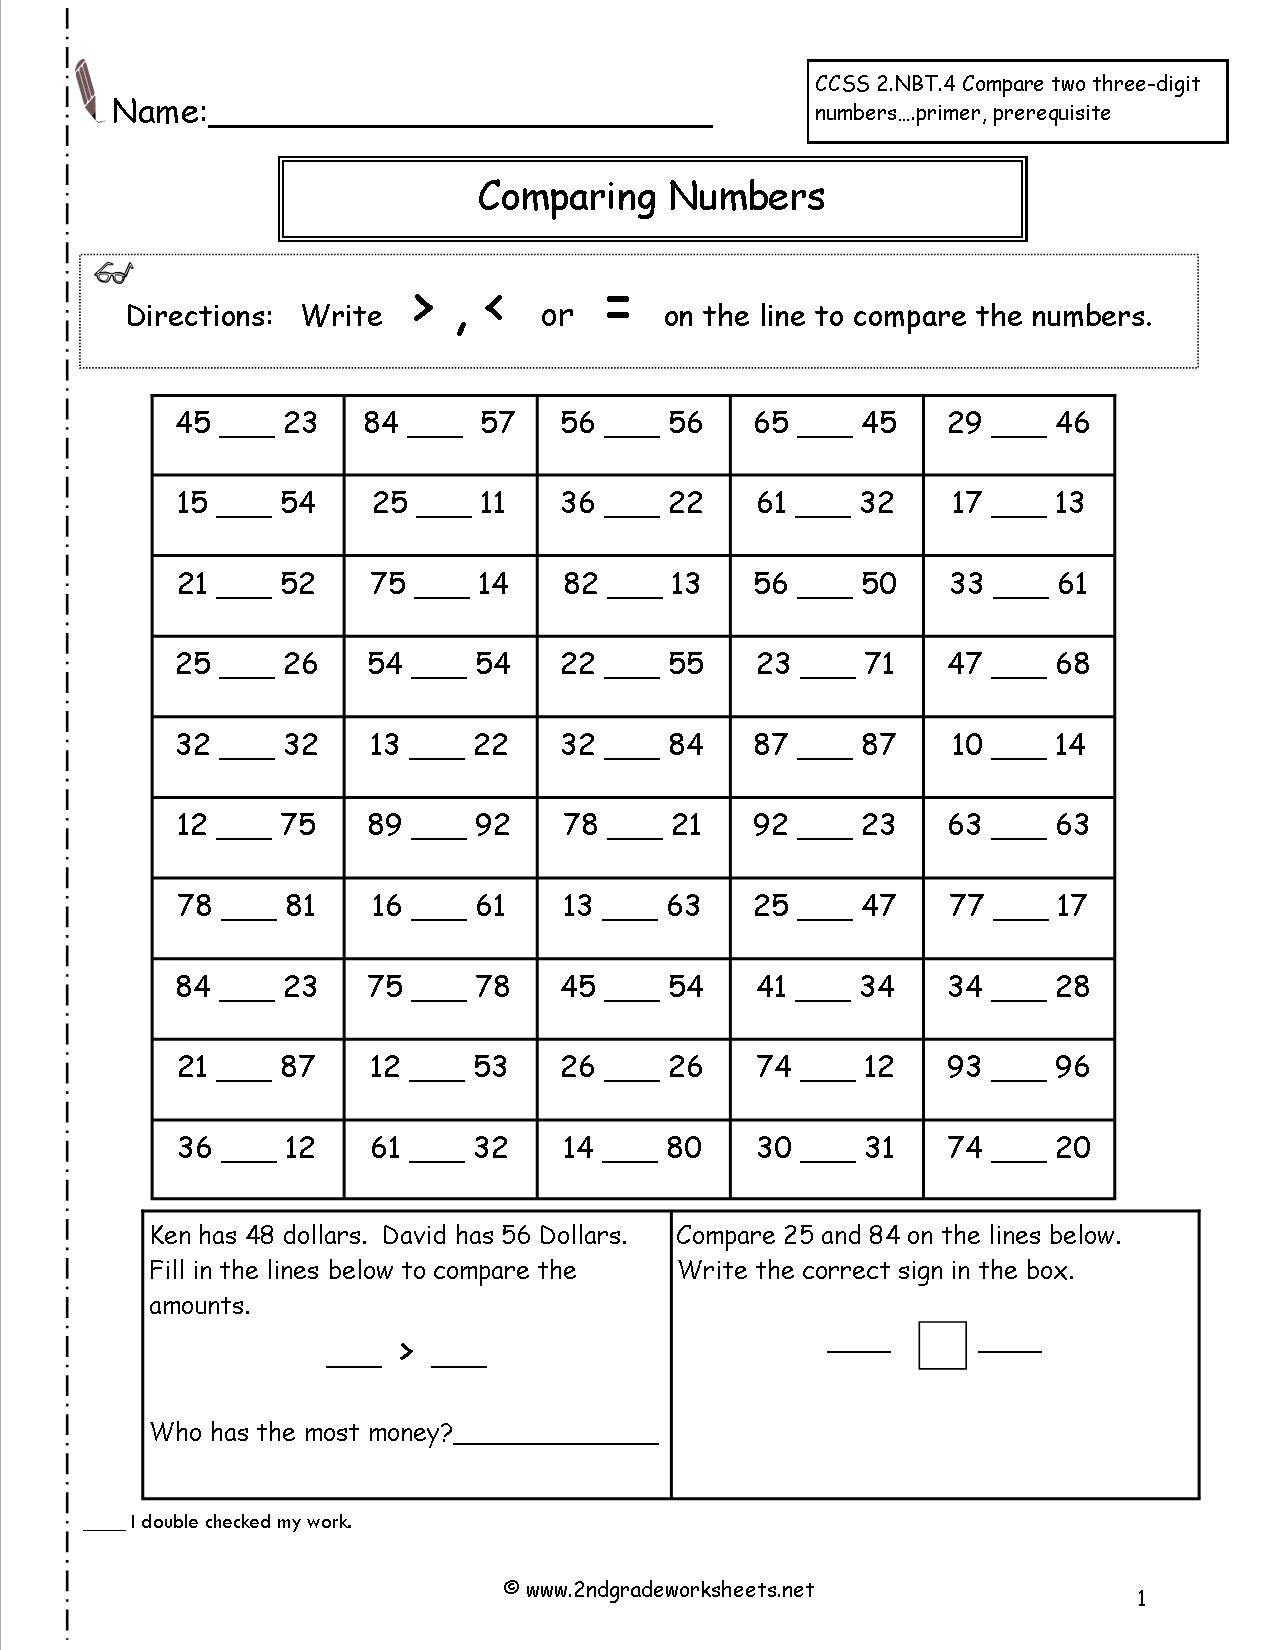 Comparing Numbers Worksheets 4Th Grade Db excel